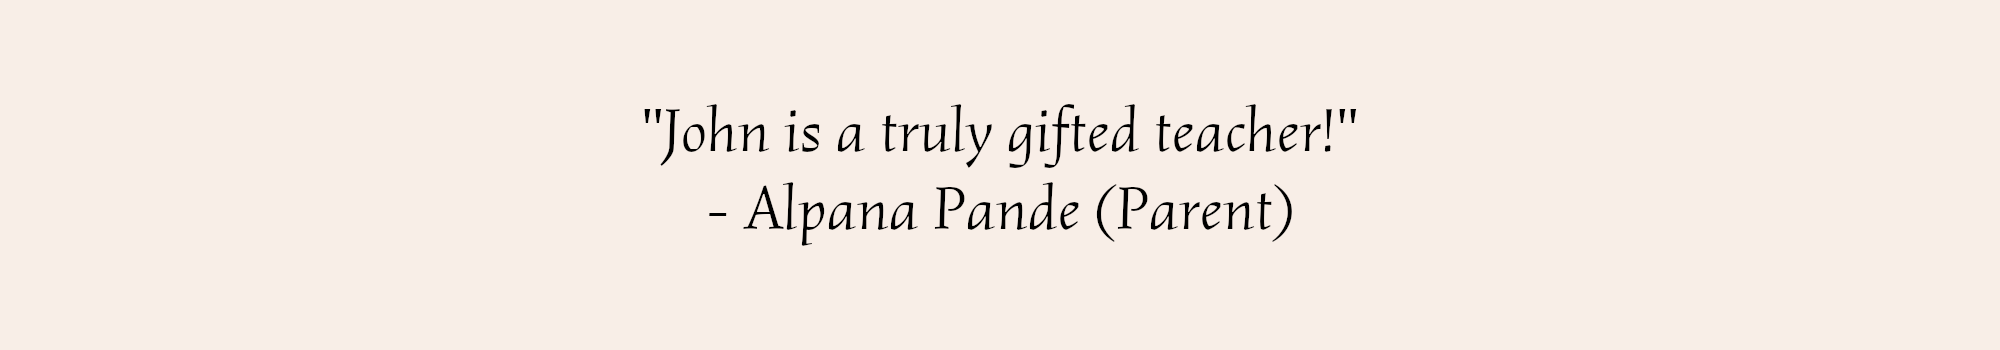 Pande Quote.png